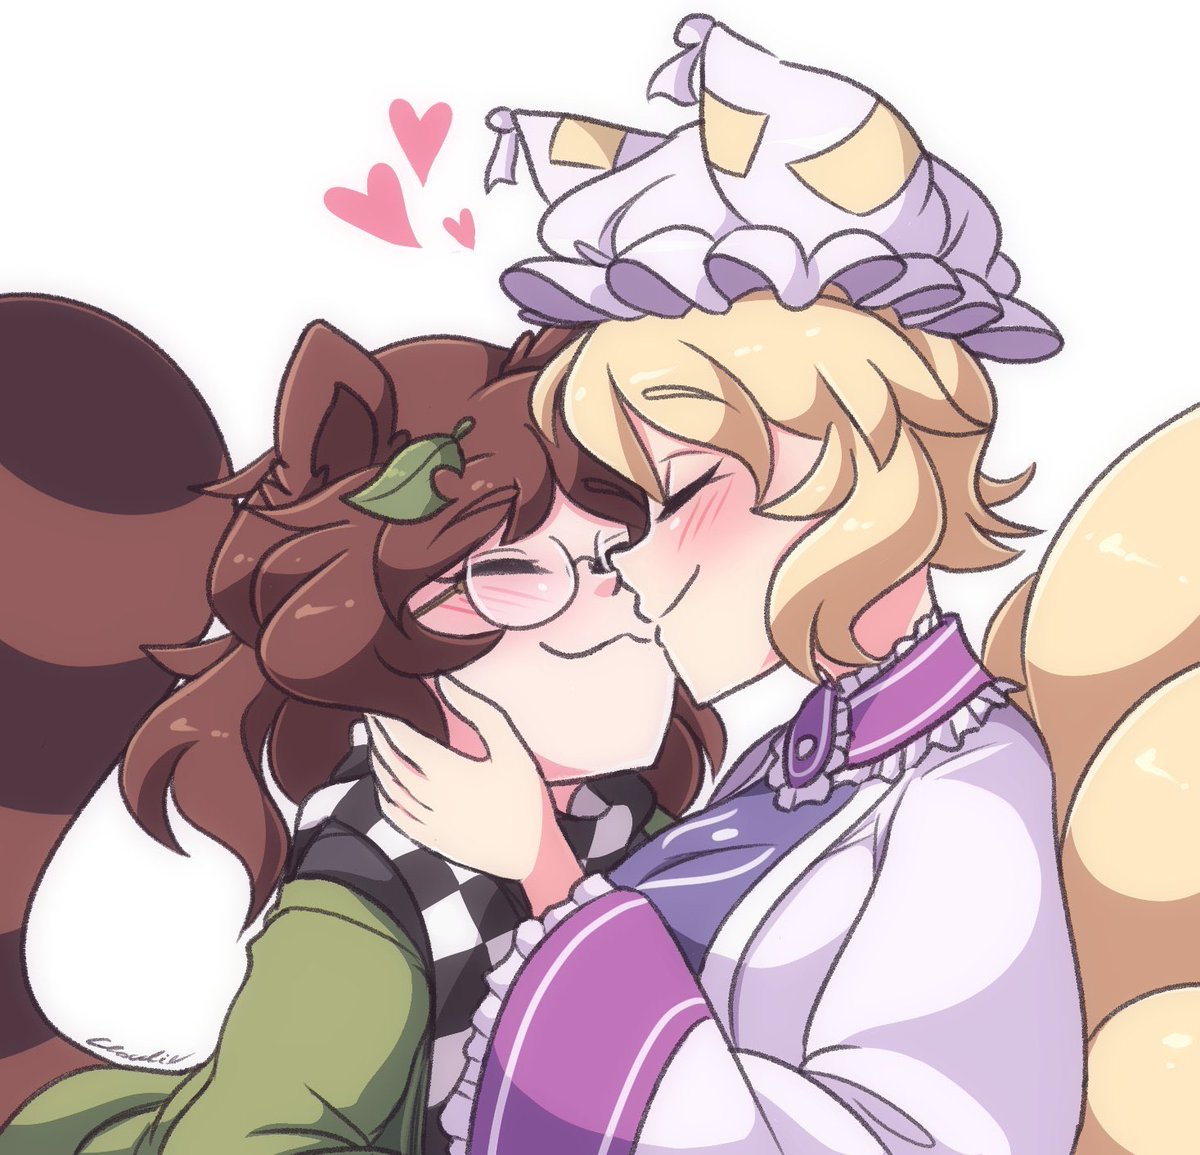 touhou is for the gays